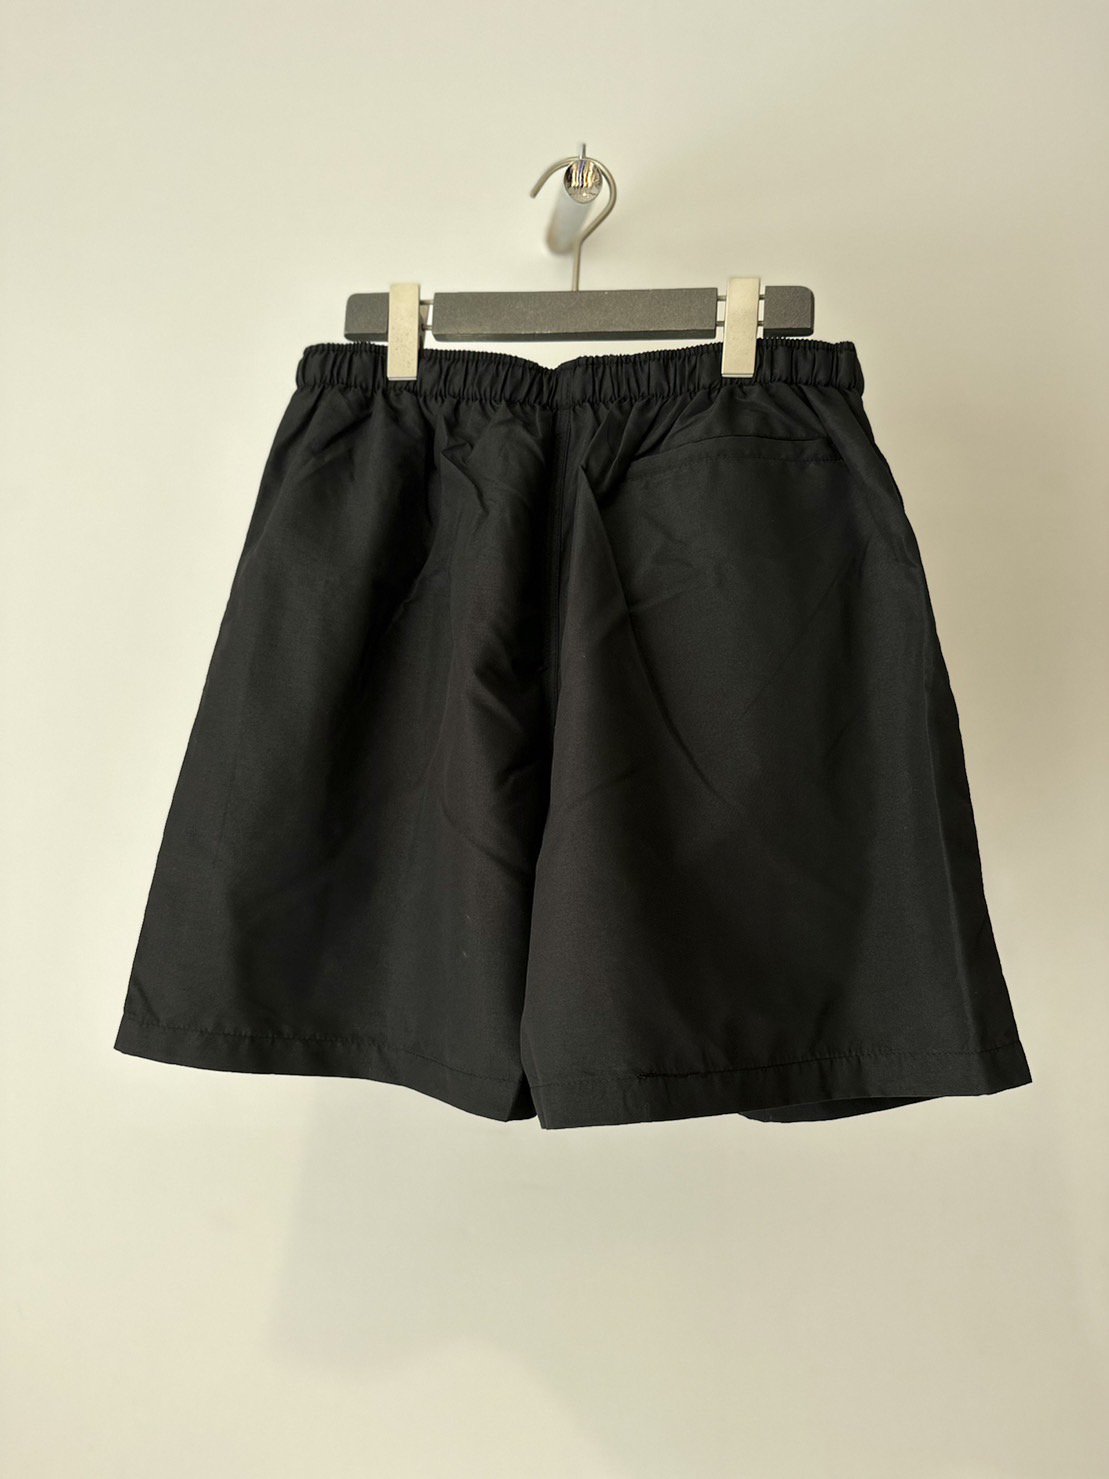 Cobra Caps<br />Microfiber All Purpose Shorts / Black<img class='new_mark_img2' src='https://img.shop-pro.jp/img/new/icons14.gif' style='border:none;display:inline;margin:0px;padding:0px;width:auto;' />